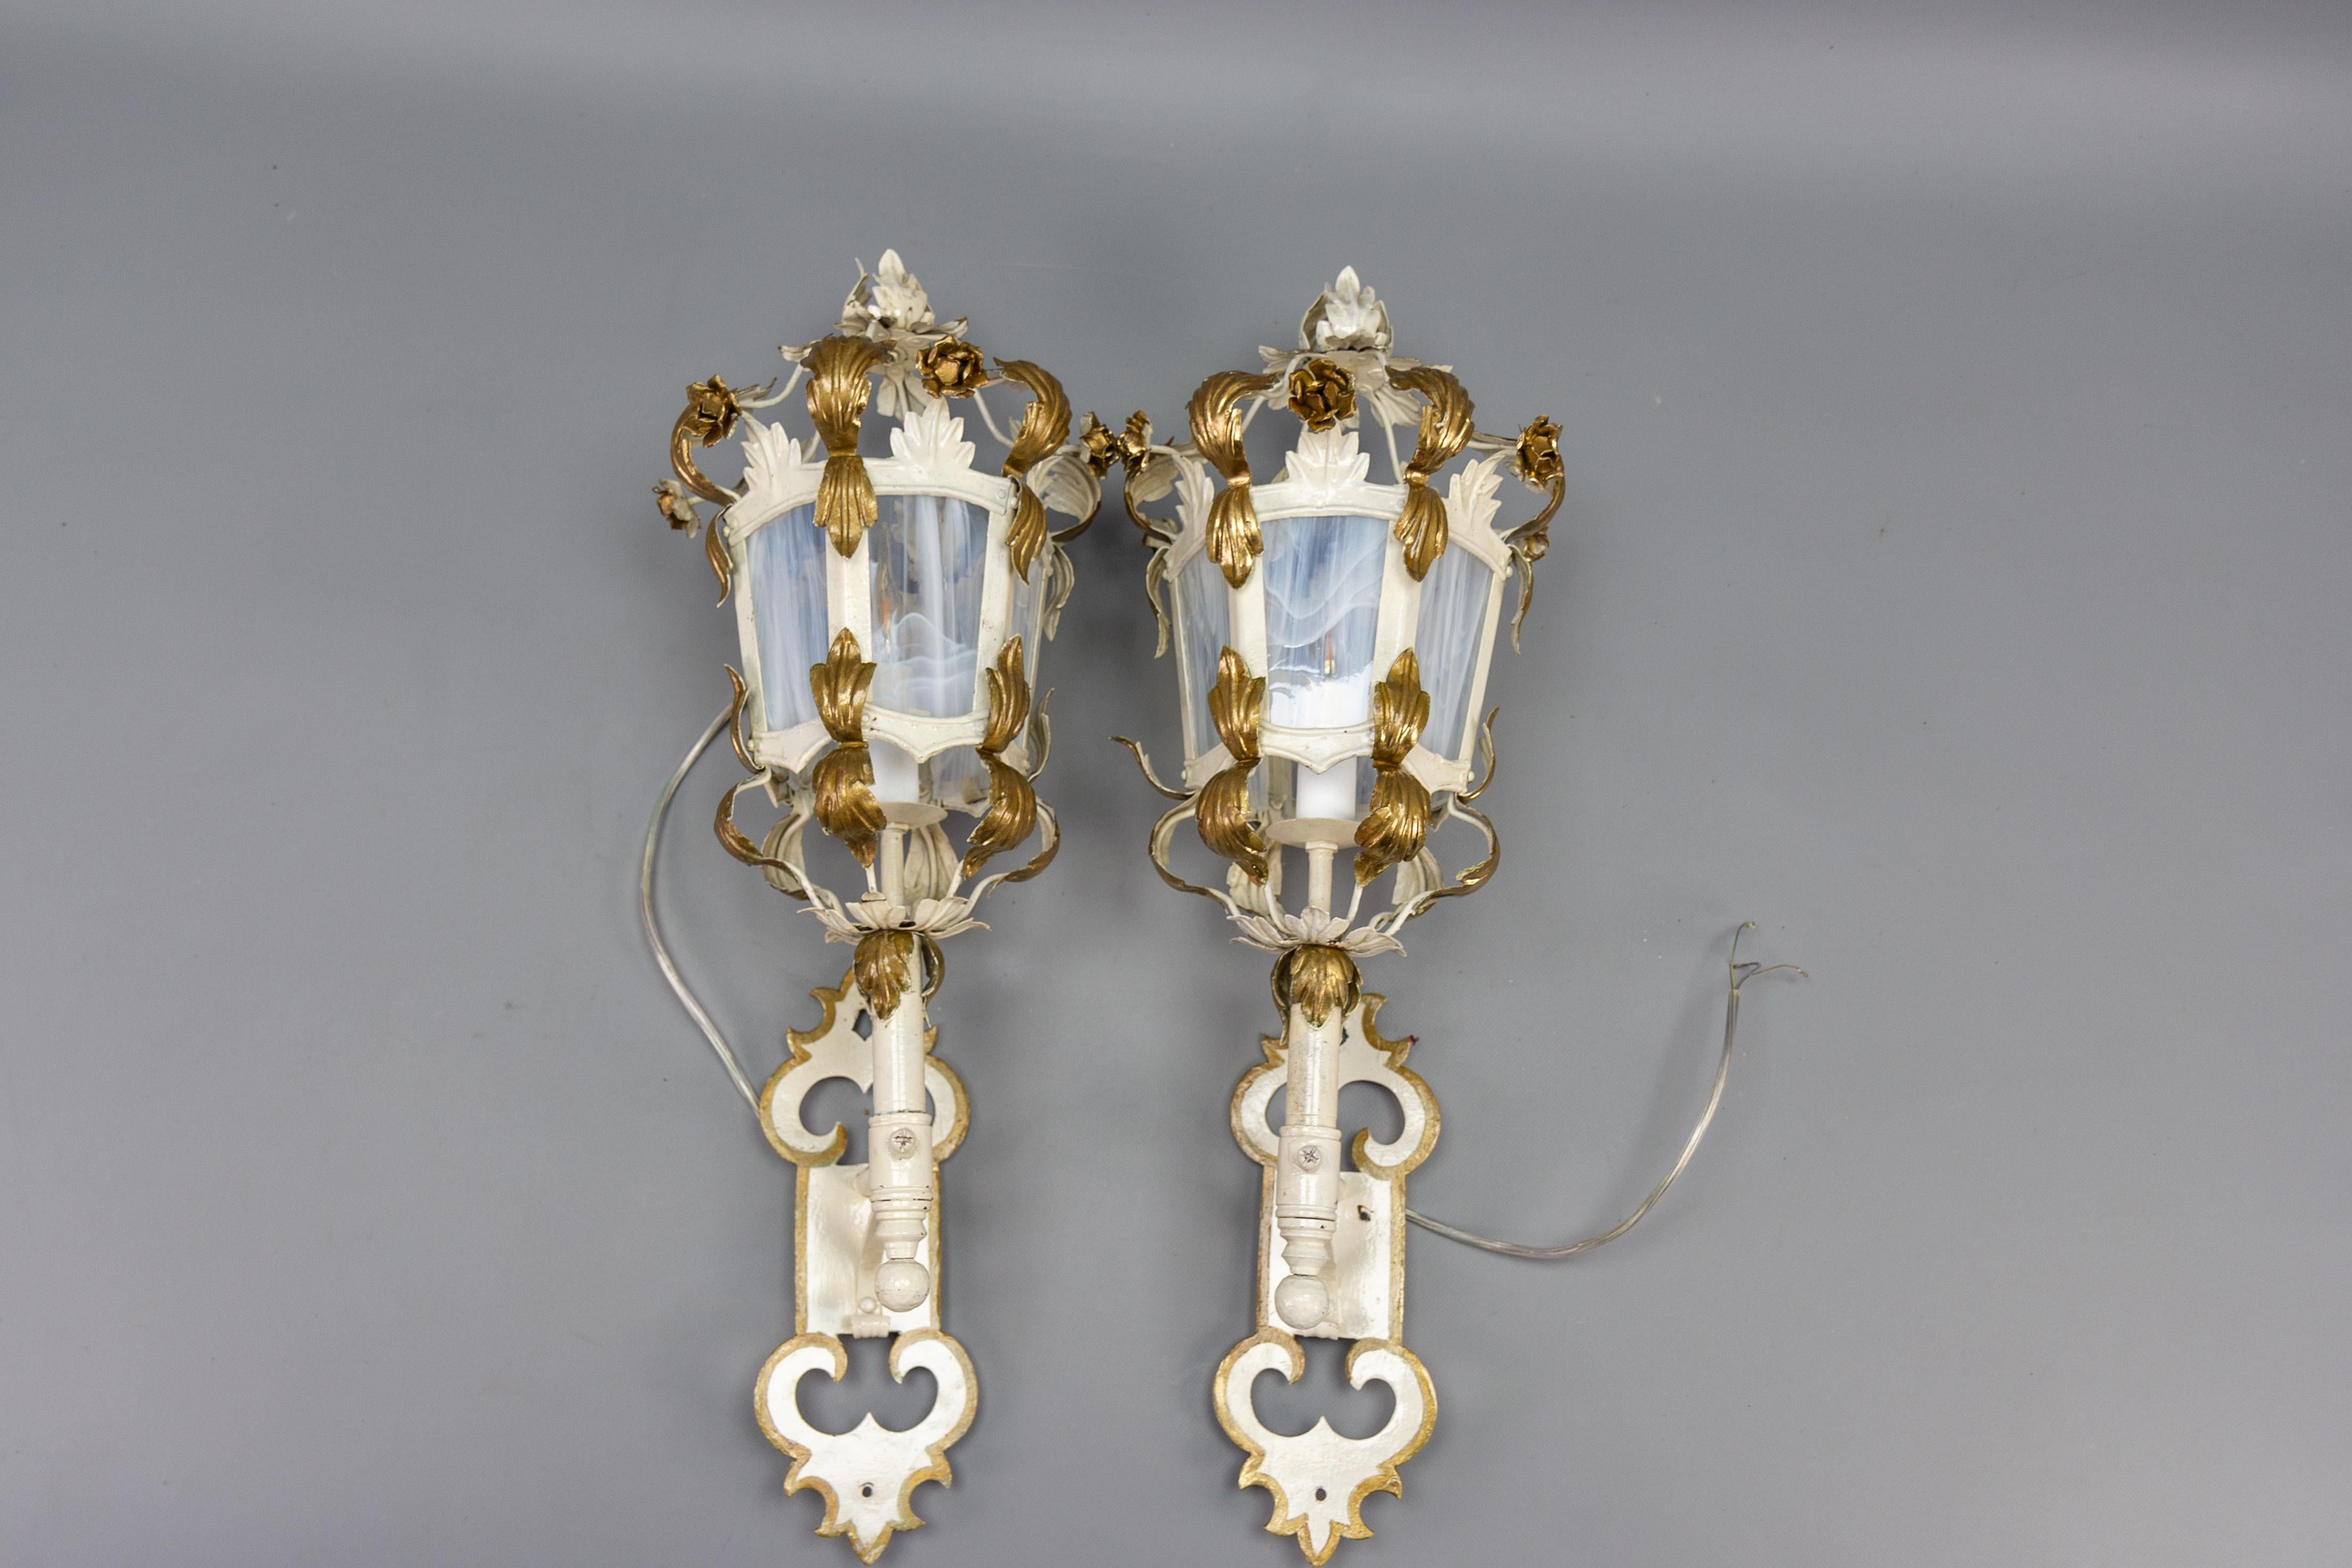 Pair of Italian White and Golden Color Metal and Glass Wall Lanterns, ca. 1970s For Sale 6